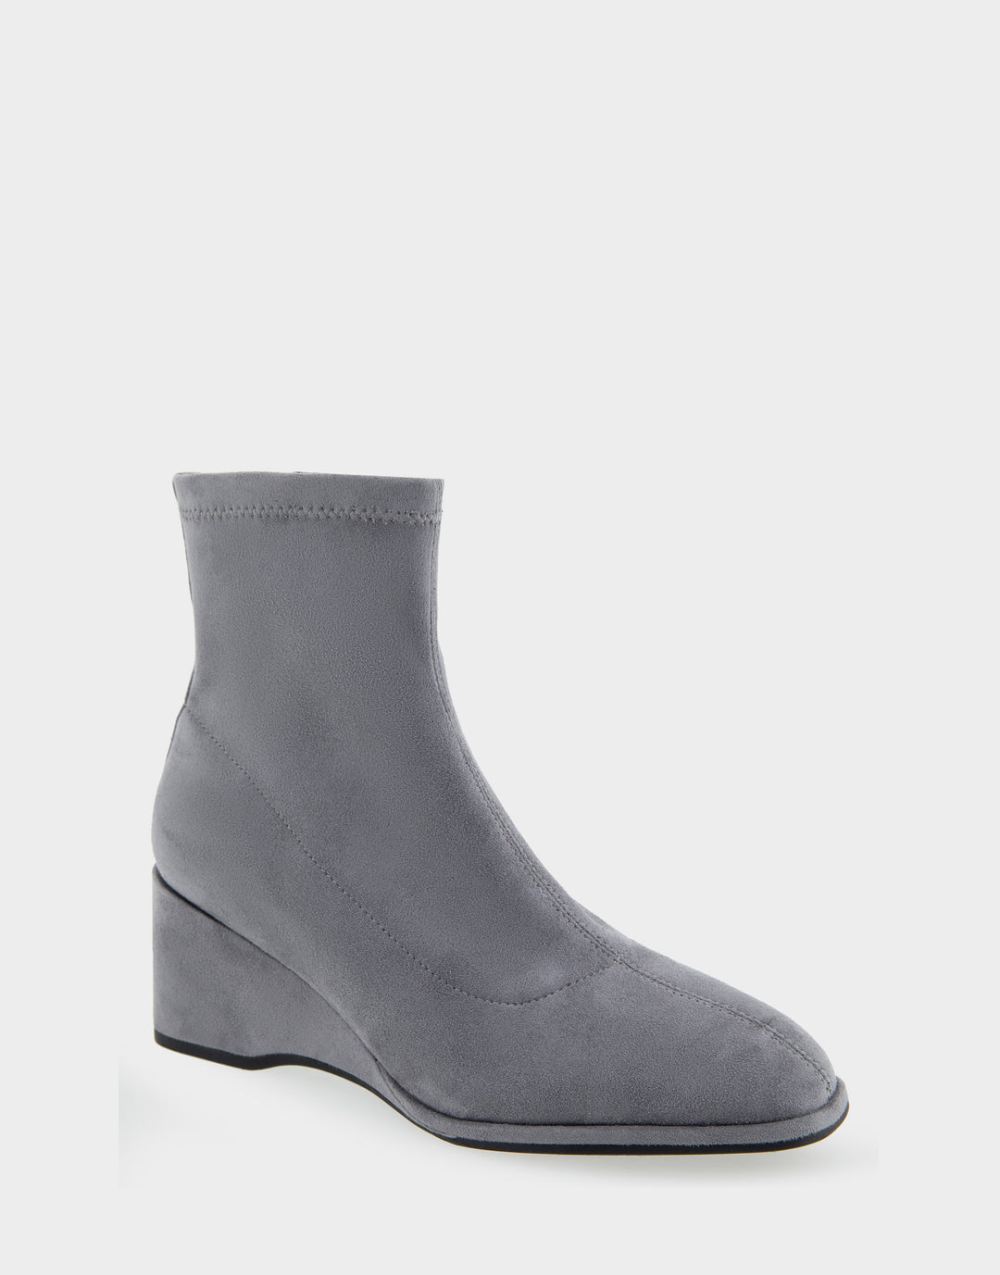 Women's | Anouk Grey Faux Suede Wedge Heel Ankle Boot